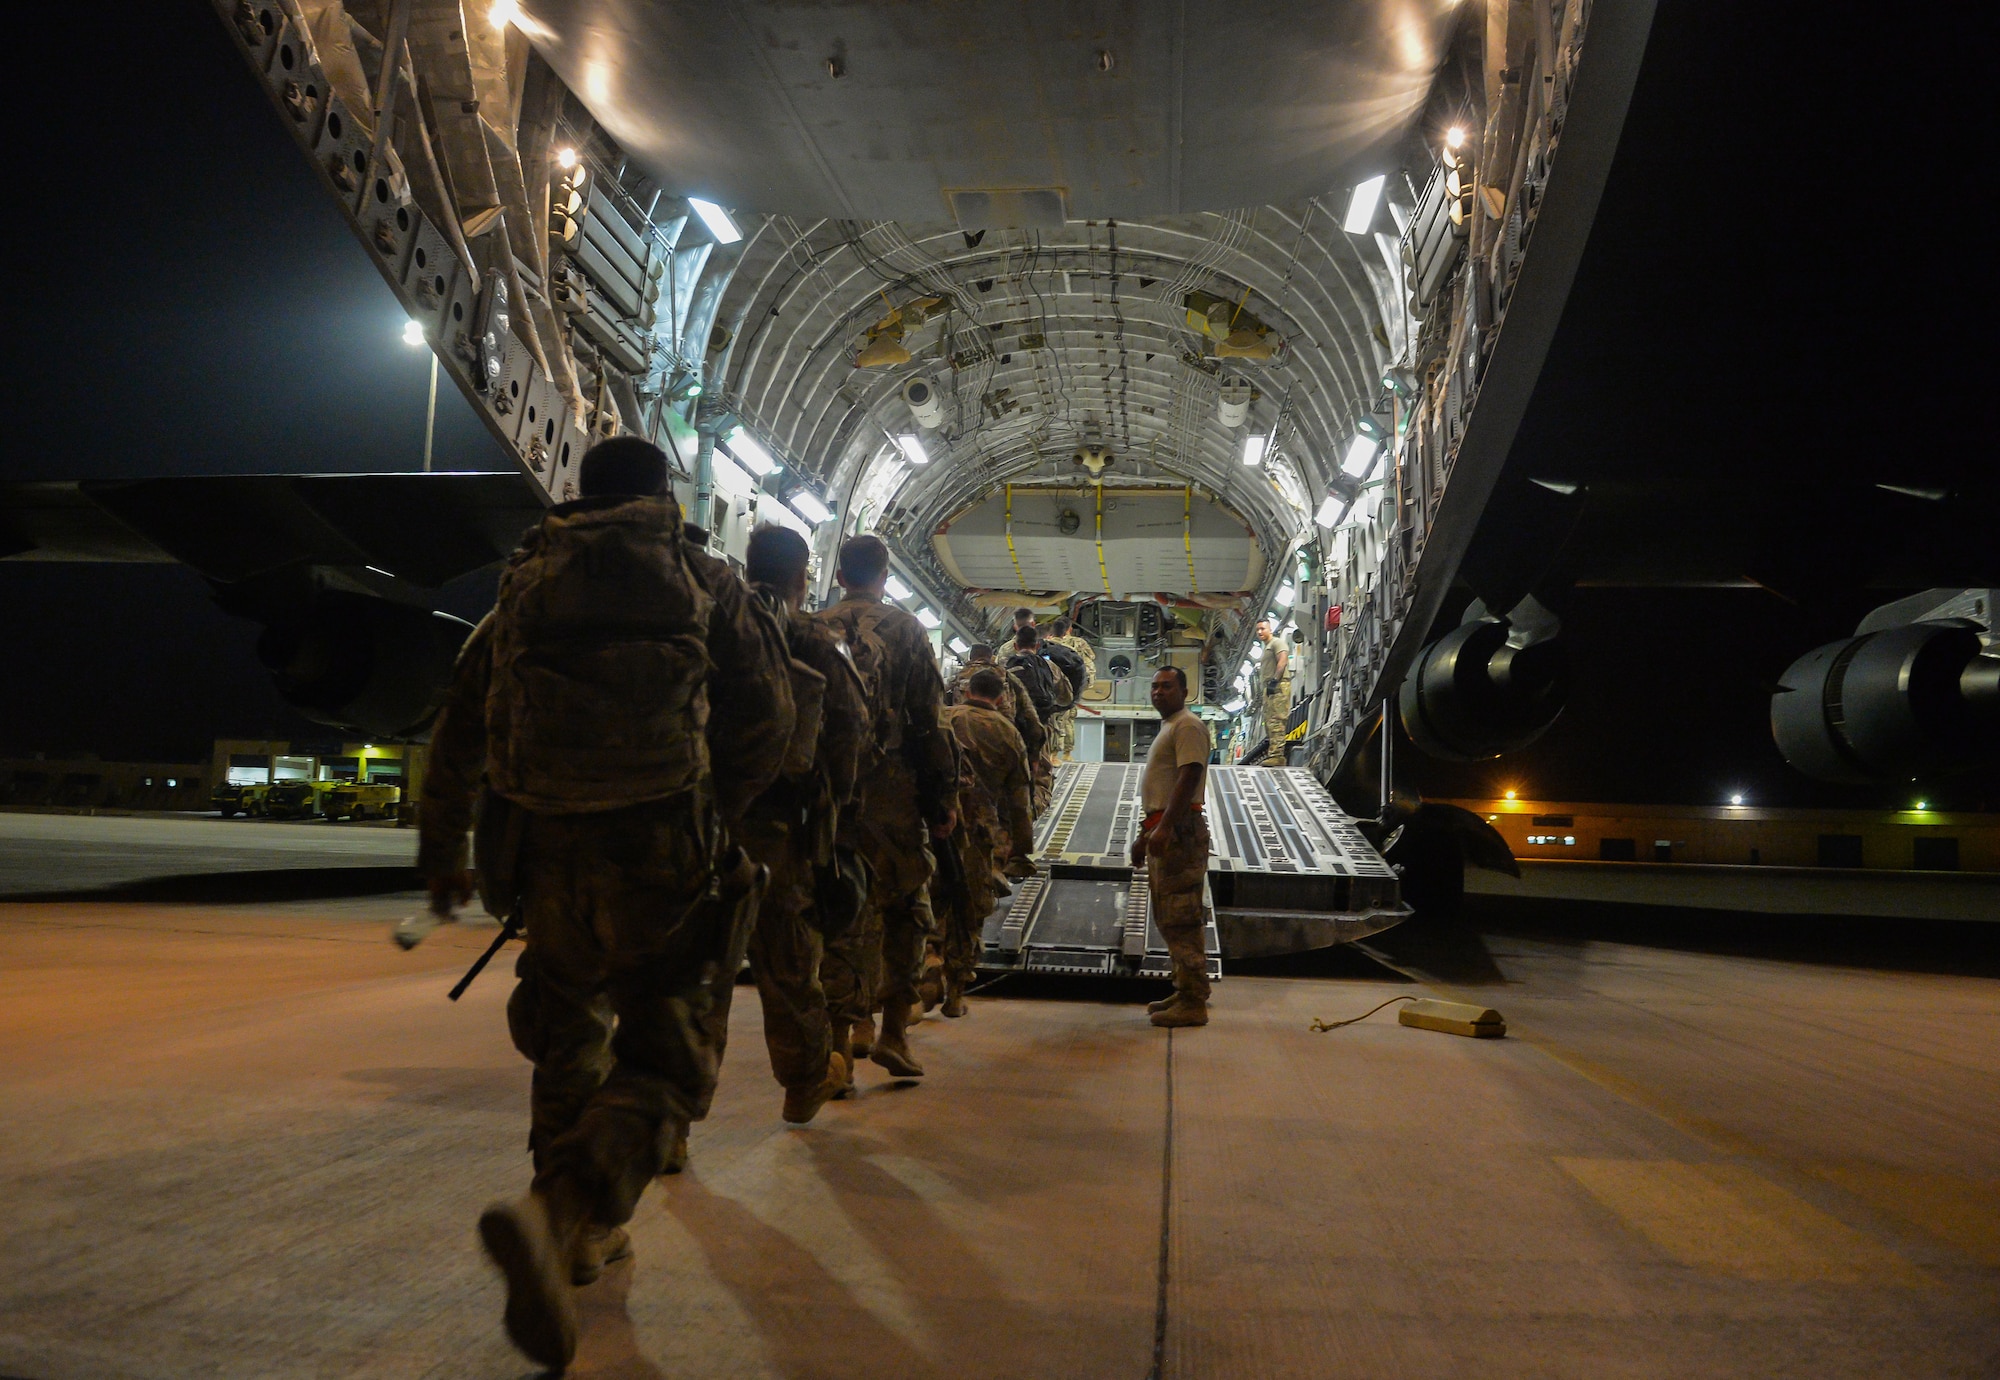 U.S. Army Soldiers with the 4th Infantry Division walk onto a C-17 Globemaster III at Prince Sultan Air Base (PSAB), Kingdom of Saudi Arabia (KSA), October 23, 2109.